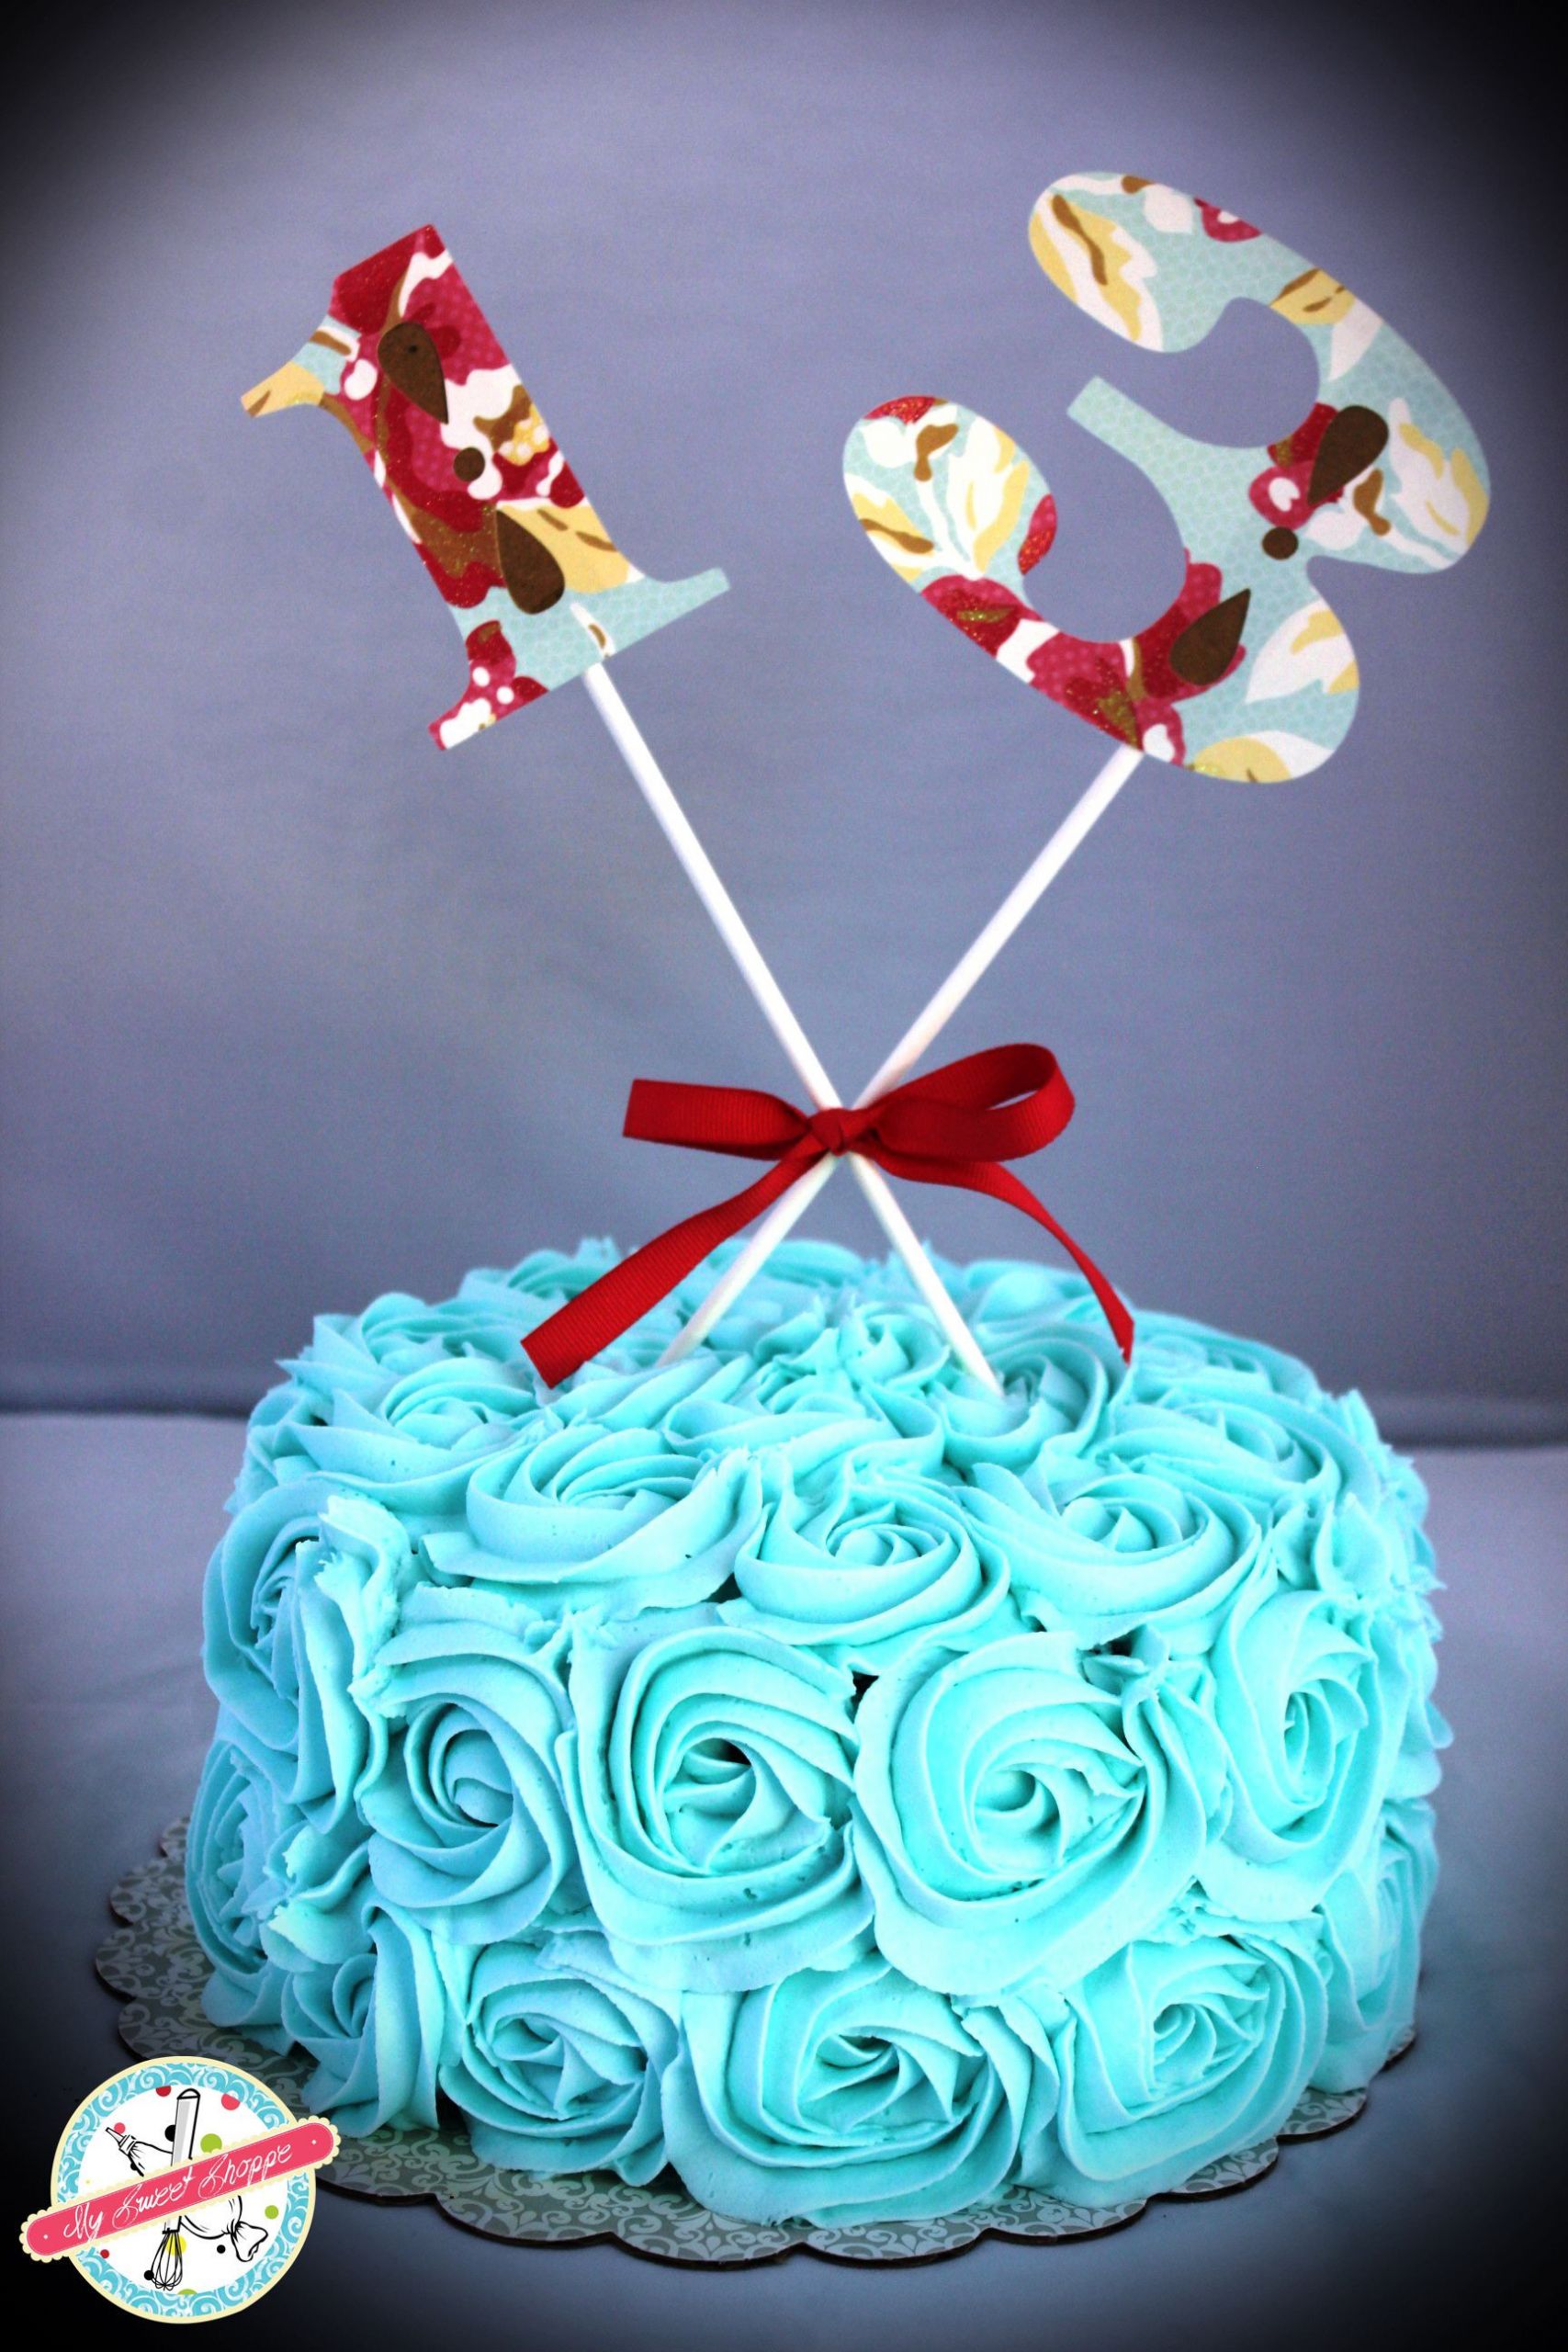 13 Year Old Beach Party Ideas
 Teal Turquoise rose cake for 13 year old